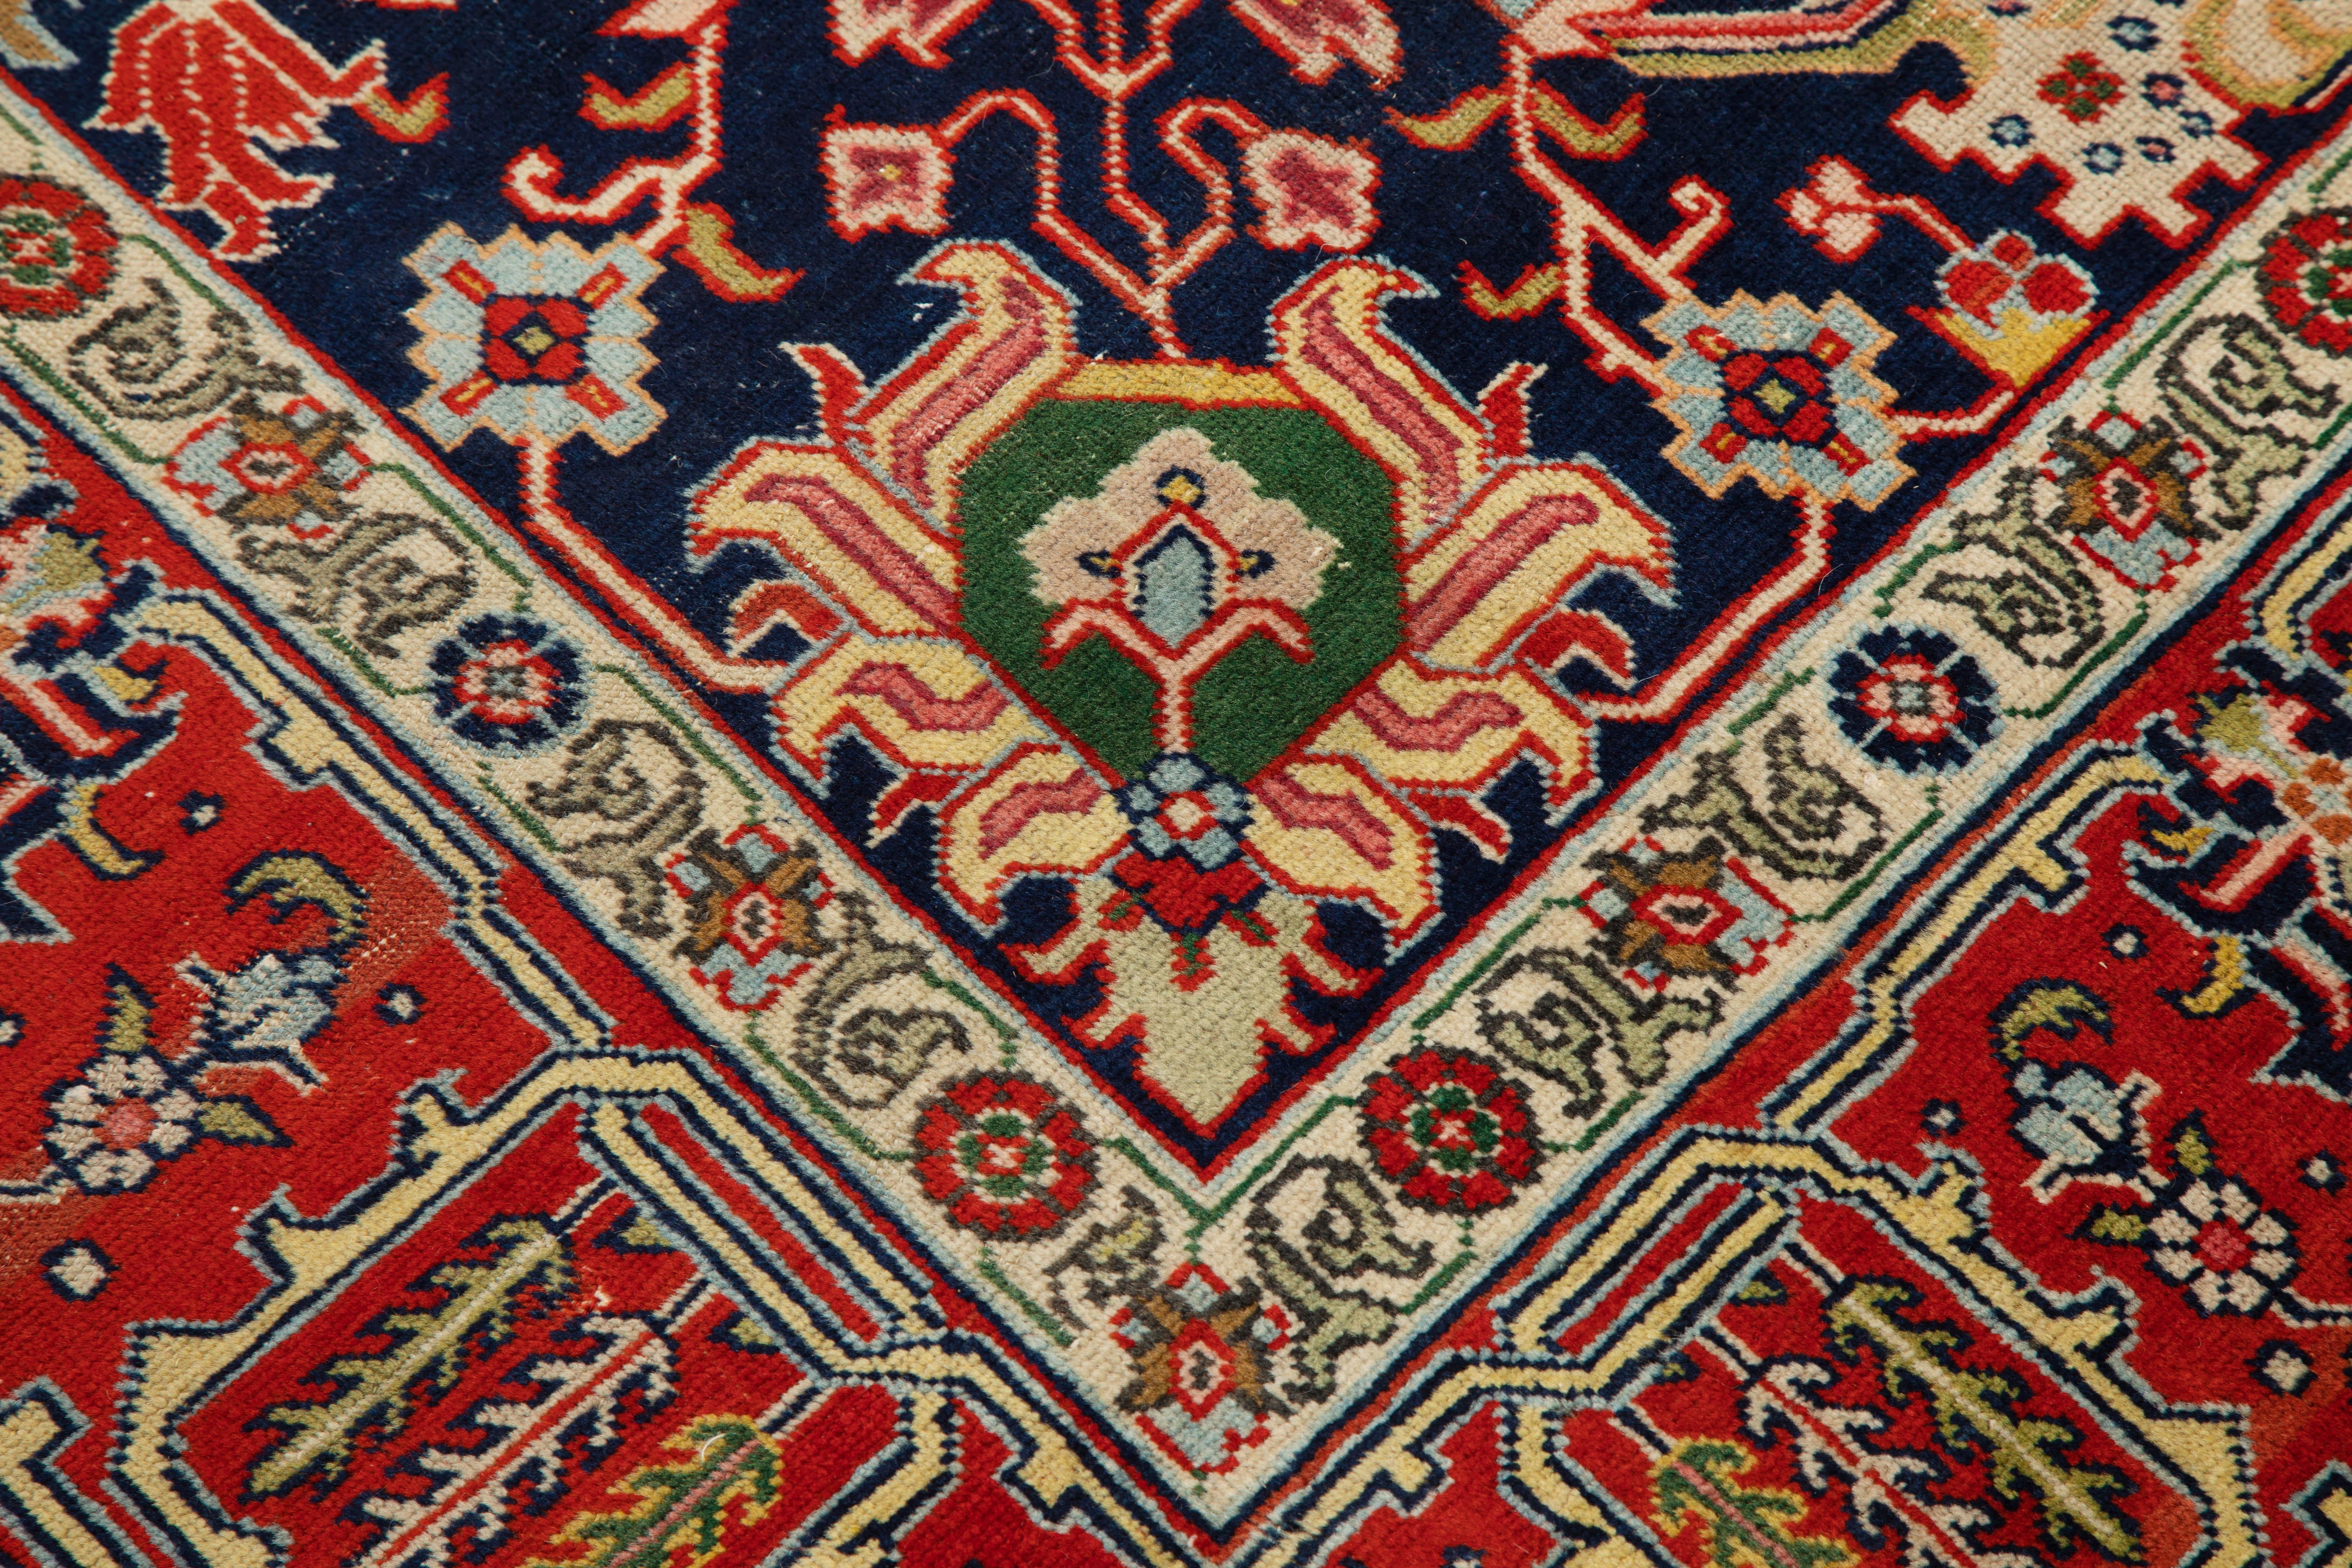 Mid-20th Century Antique Persian Tabriz Rug with Traditional Floral Motif in Navy and Red  For Sale